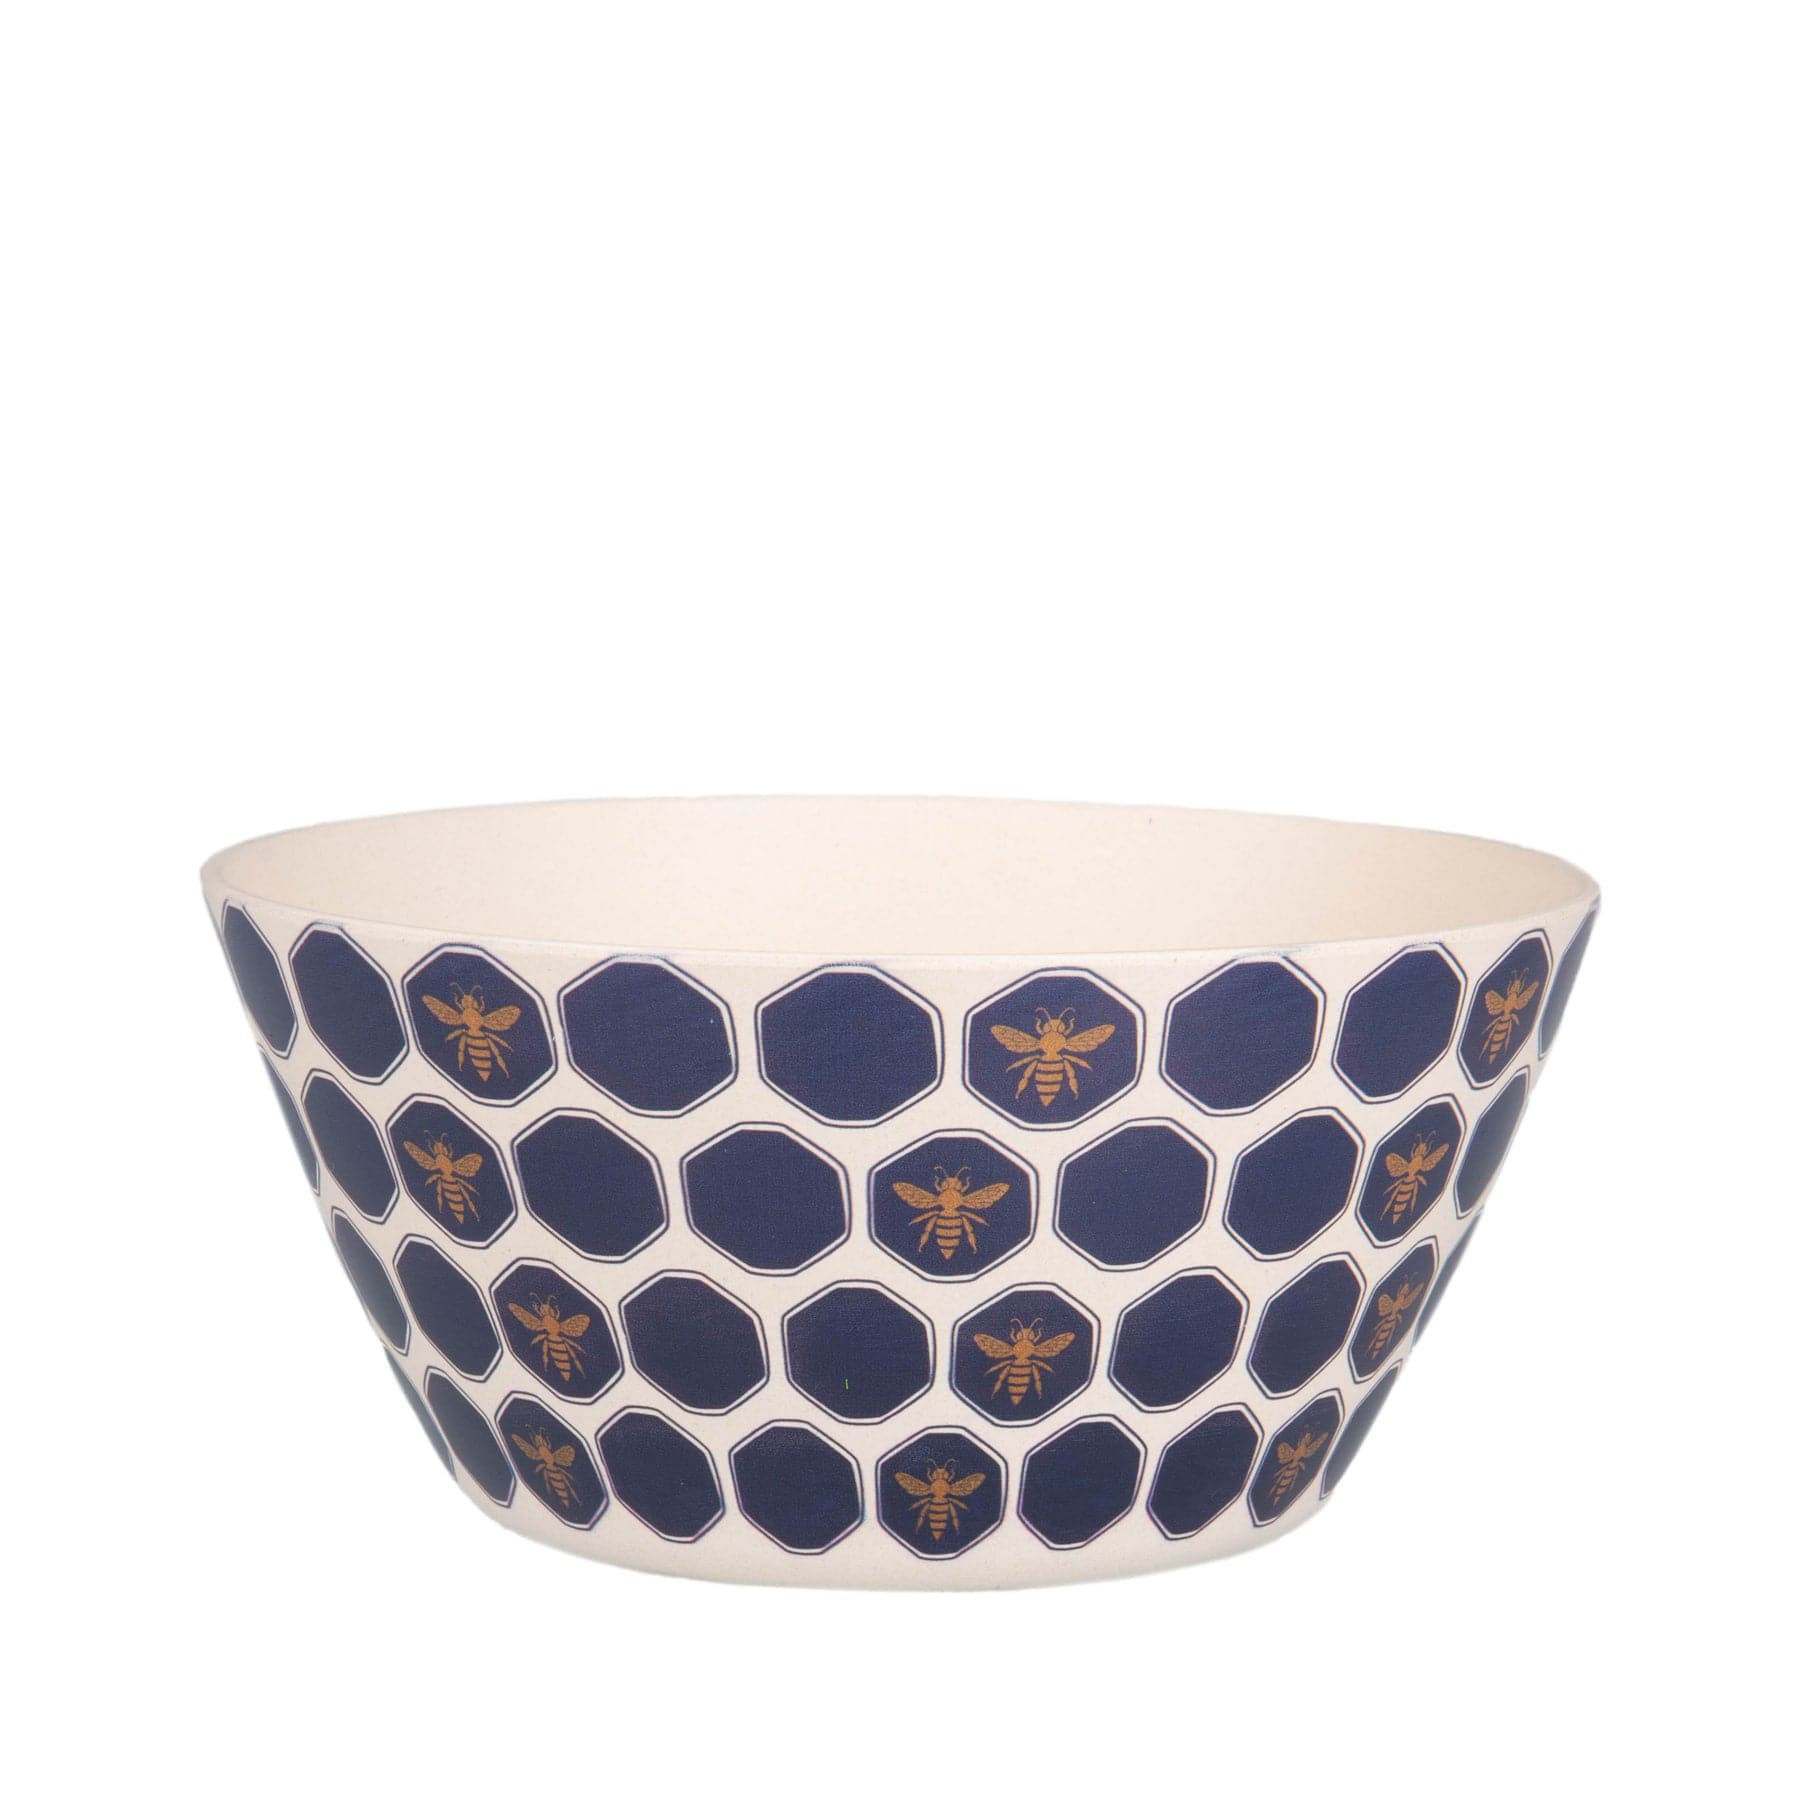 Decorative ceramic bowl with hexagonal blue patterns and golden bee motifs on white background